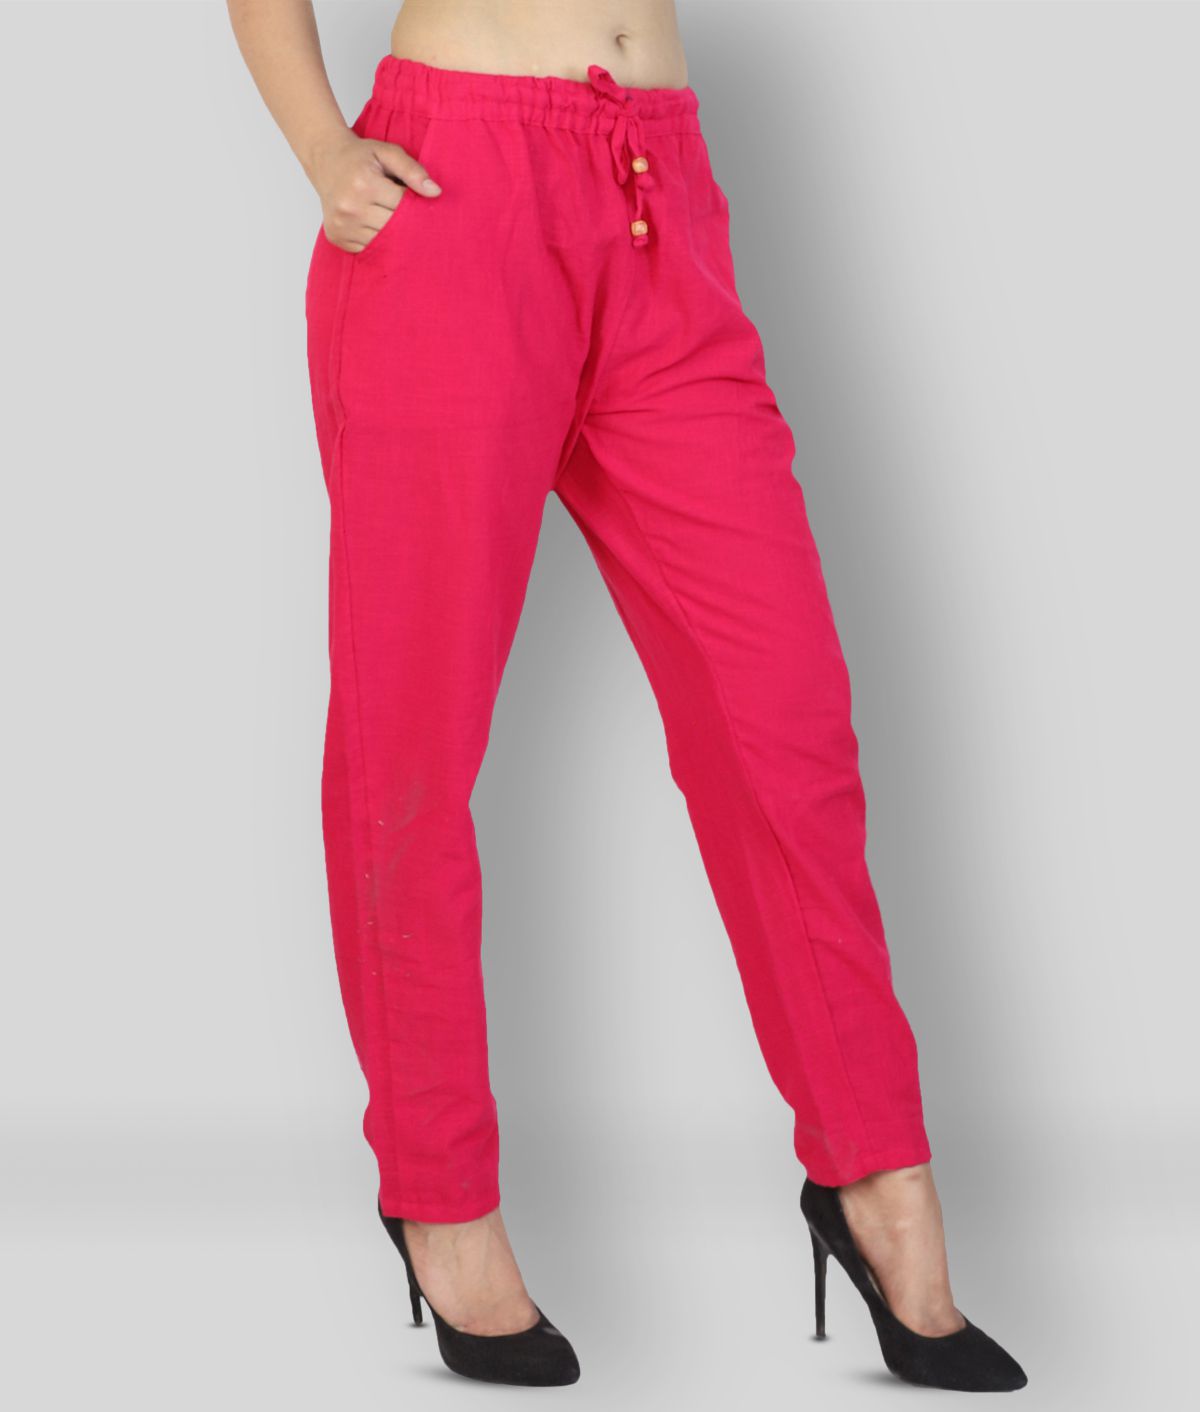     			Lee Moda - Pink Cotton Regular Fit Women's Casual Pants  ( Pack of 1 )